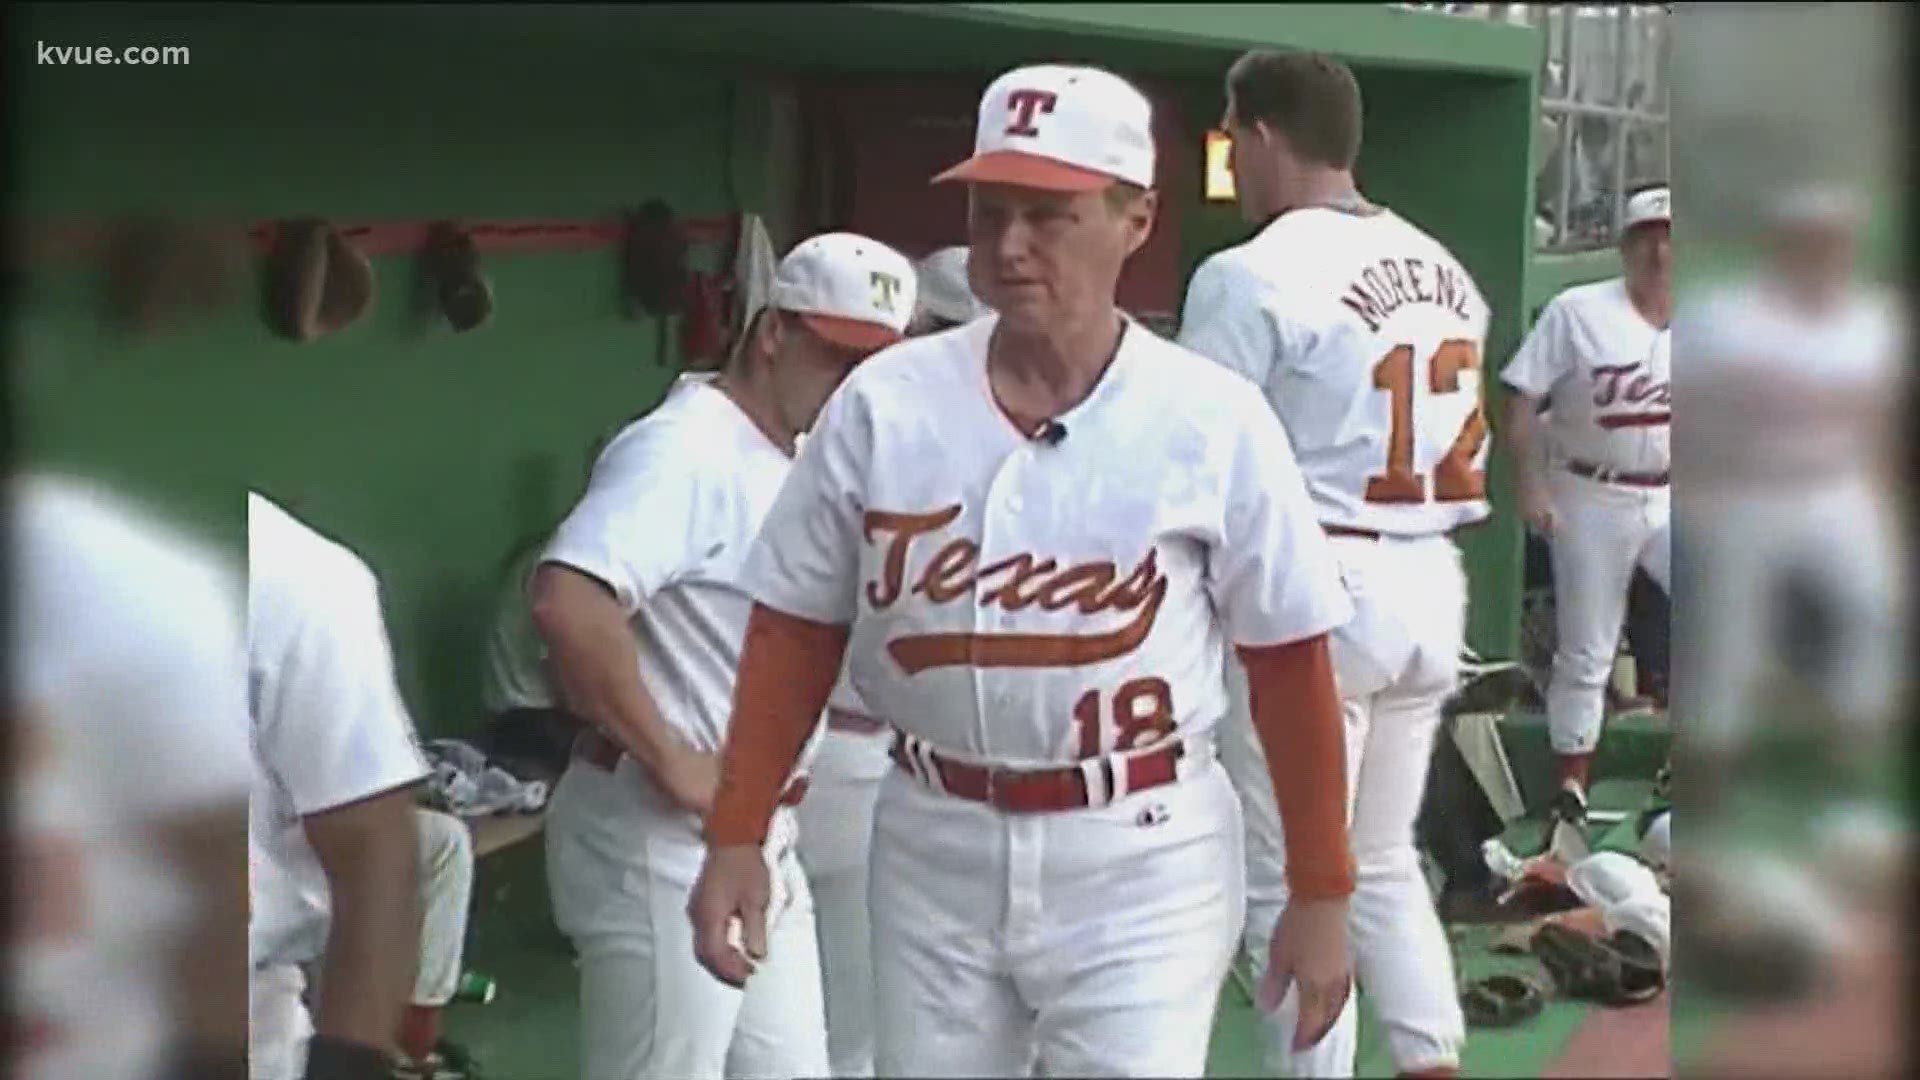 According to Austin American-Statesman sports writer Kirk Bohls, UT's all-time winningest baseball coach Cliff Gustafson is improving after a heart attack.